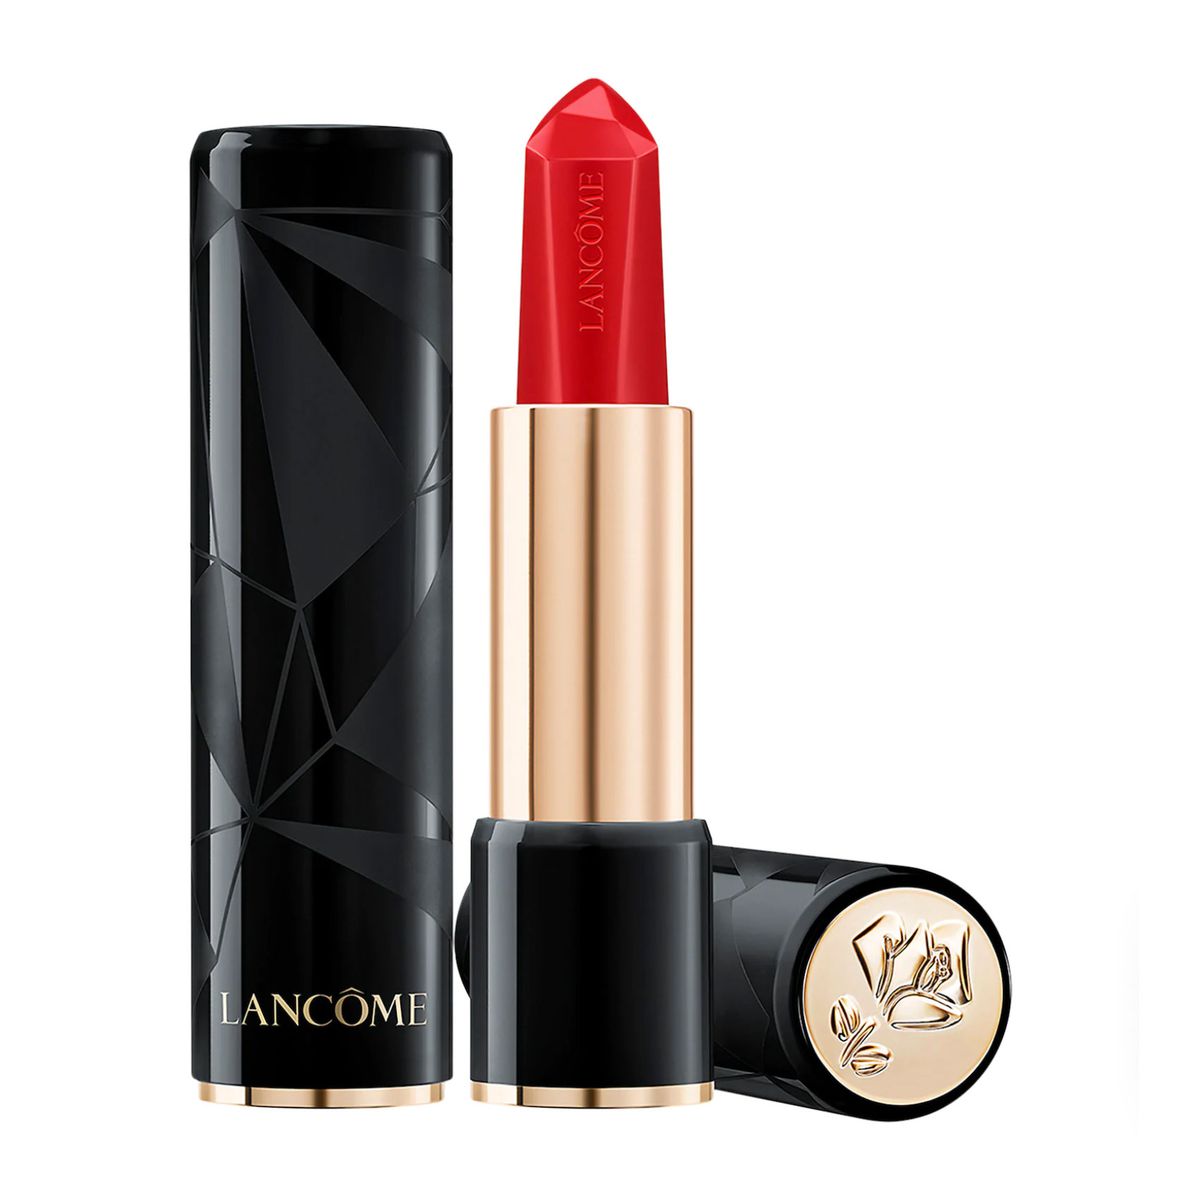 Lancome L'Absolu Rouge Ruby in Bad Blood Ruby